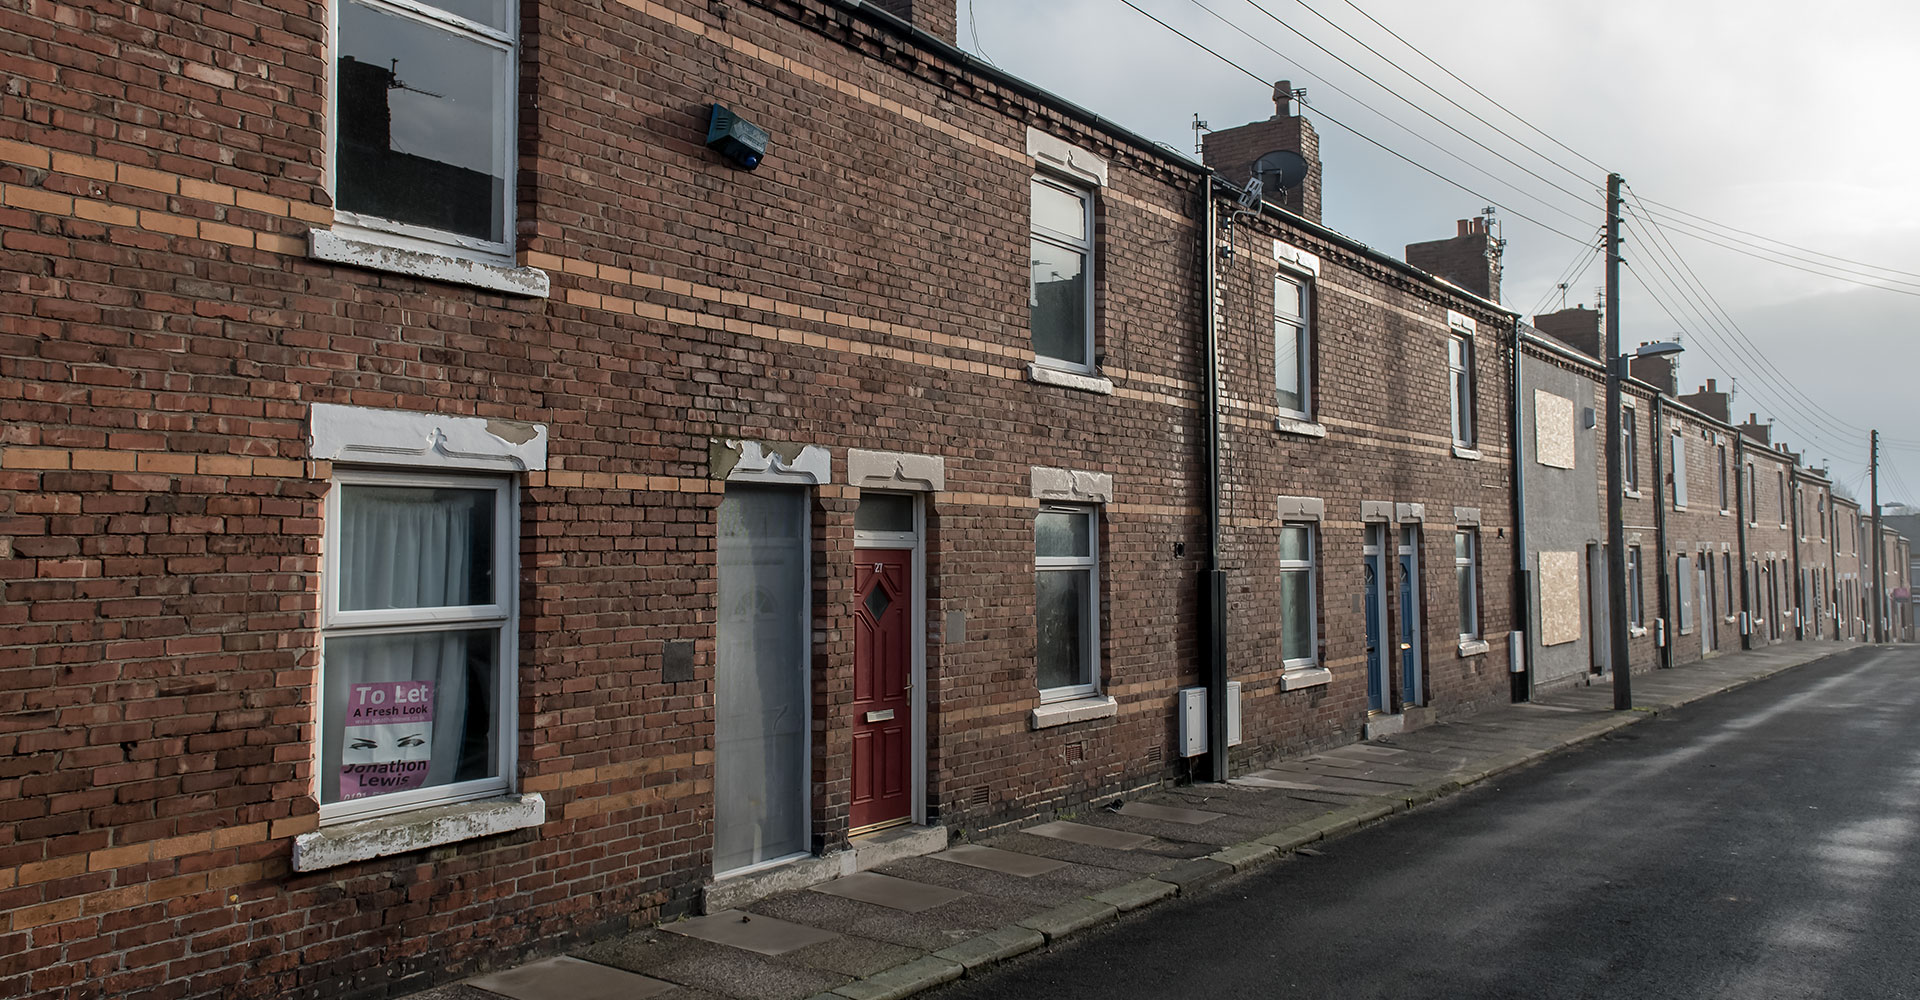 Social Justice: Housing injustice and the disposal of social housing. A row of terraced houses in Horden, County Durham.